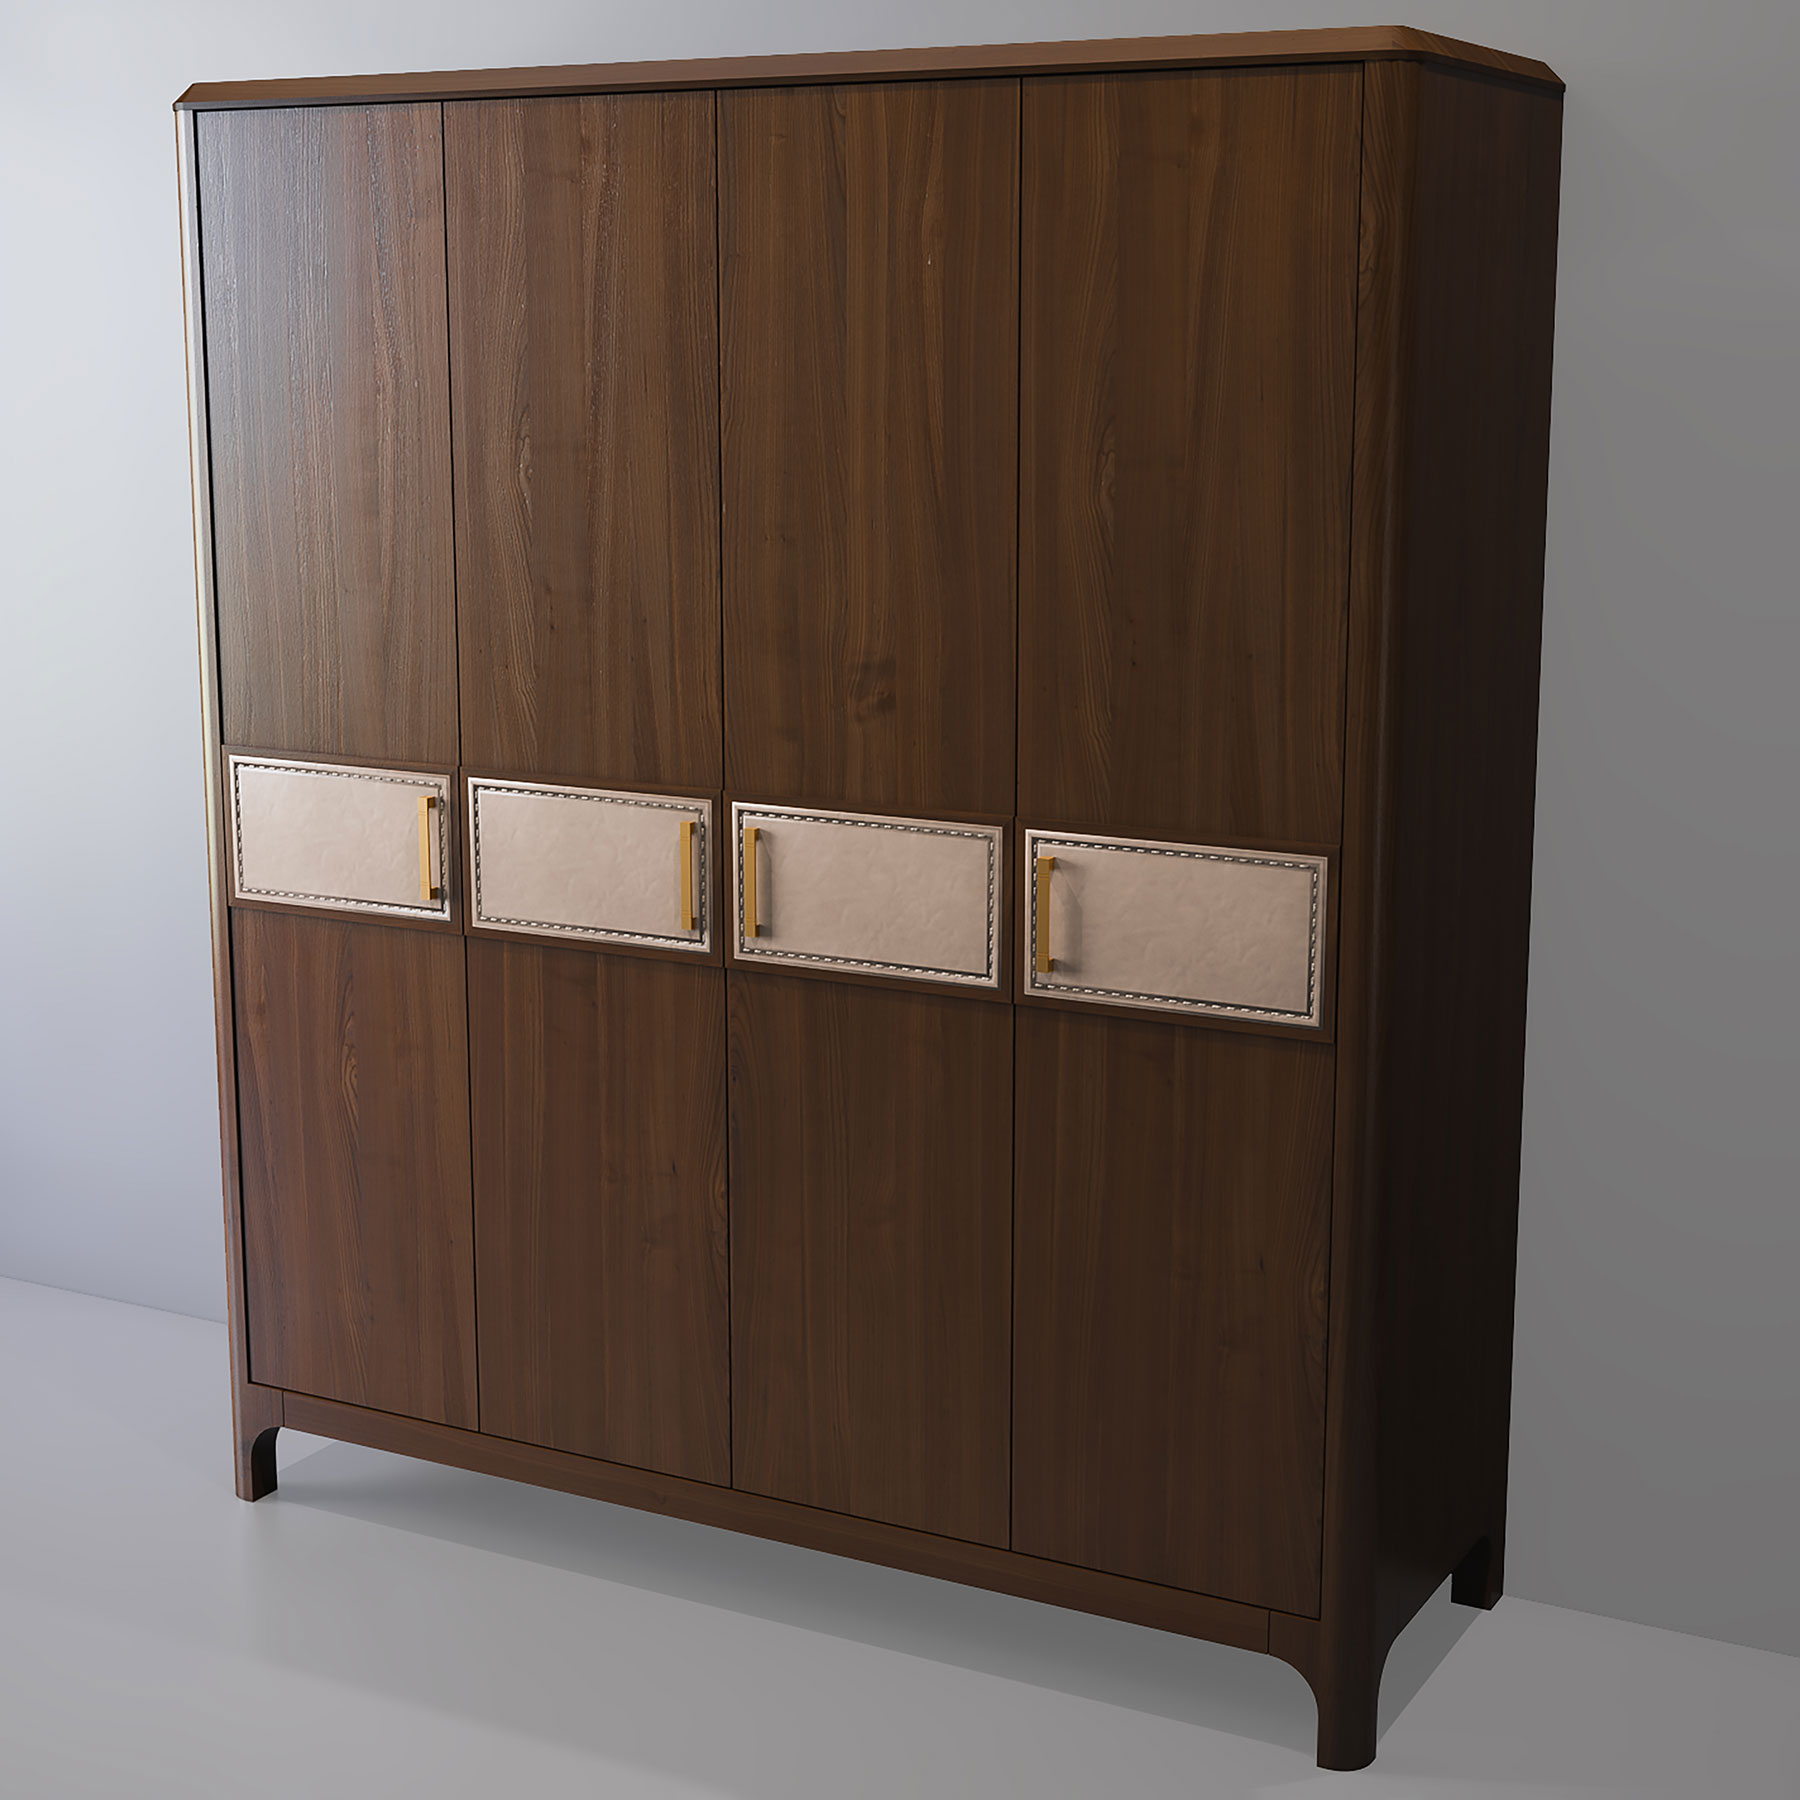 A four-door wardrobe from the Audrey collection 4